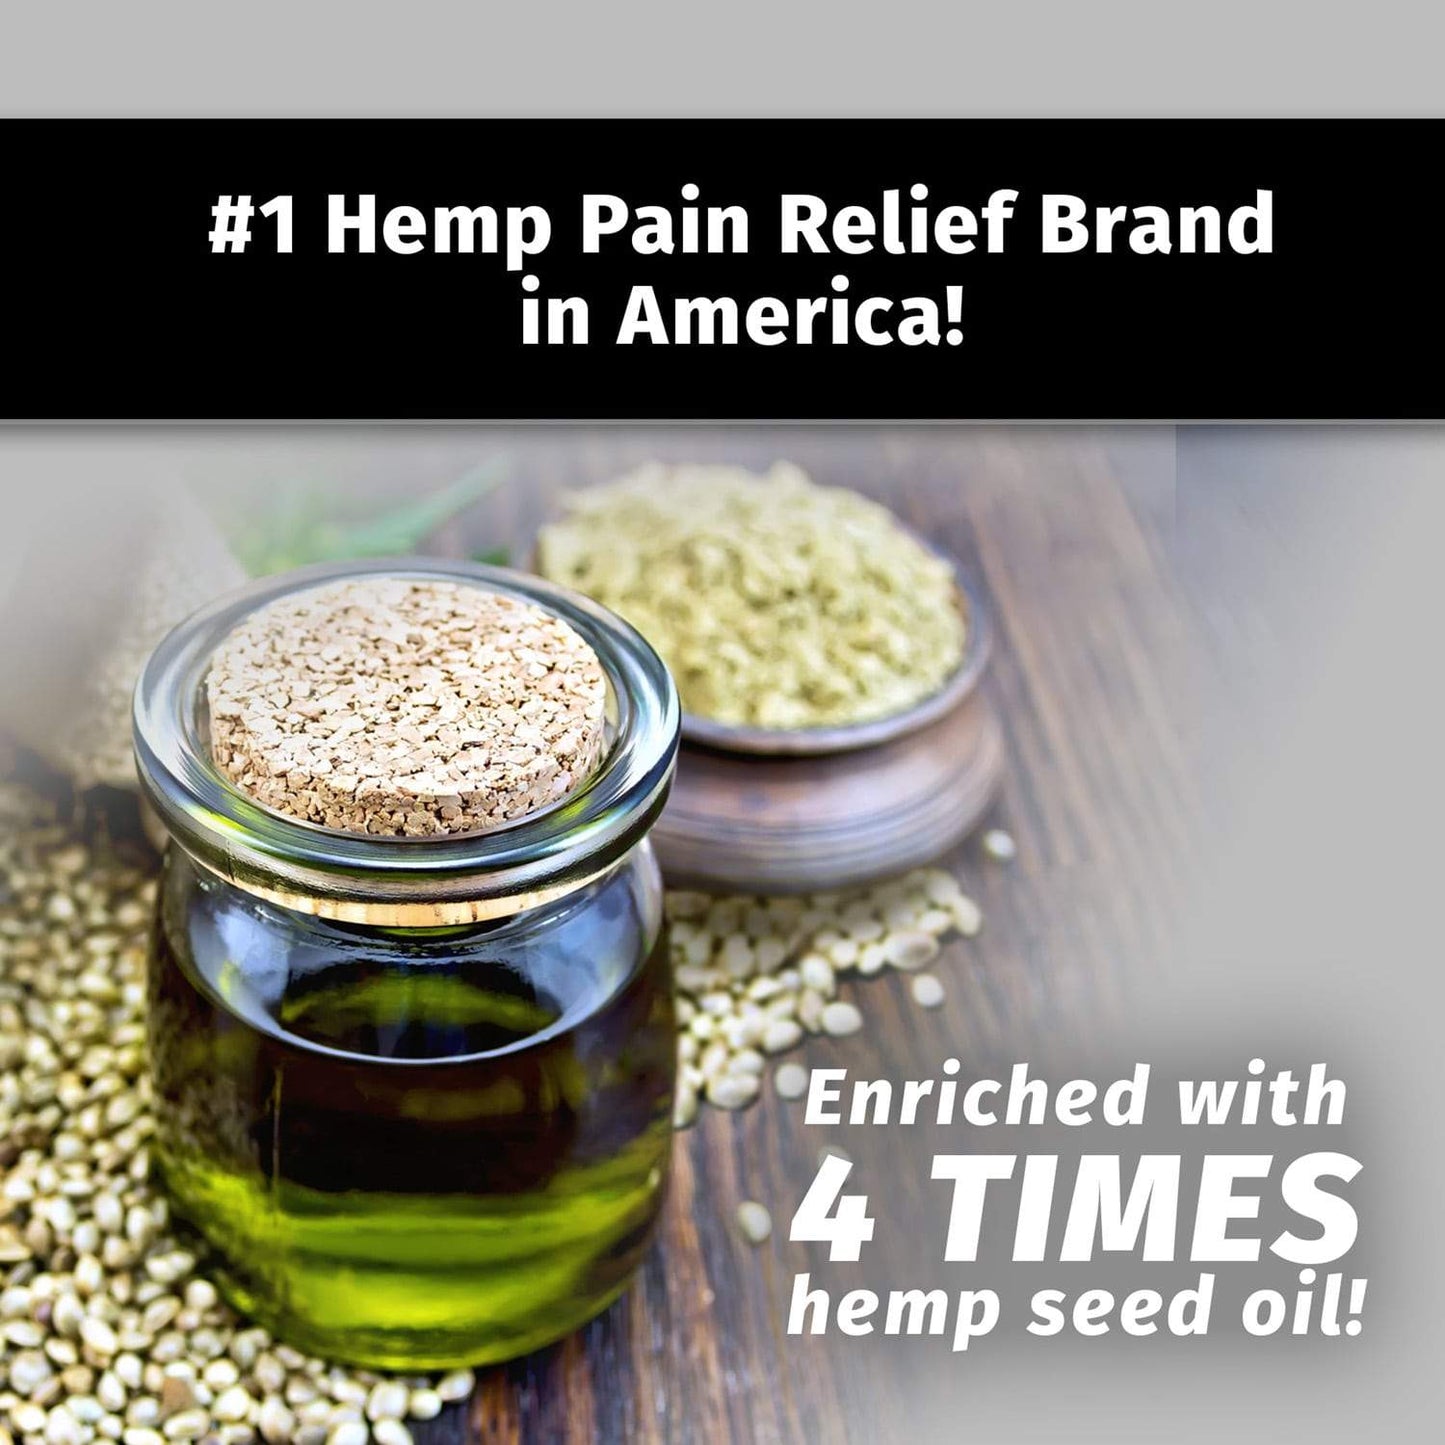 #1 Hemp pain relief brand in America, enriched with 4 times hemp seed oil shows hemp seed oil in glass jar